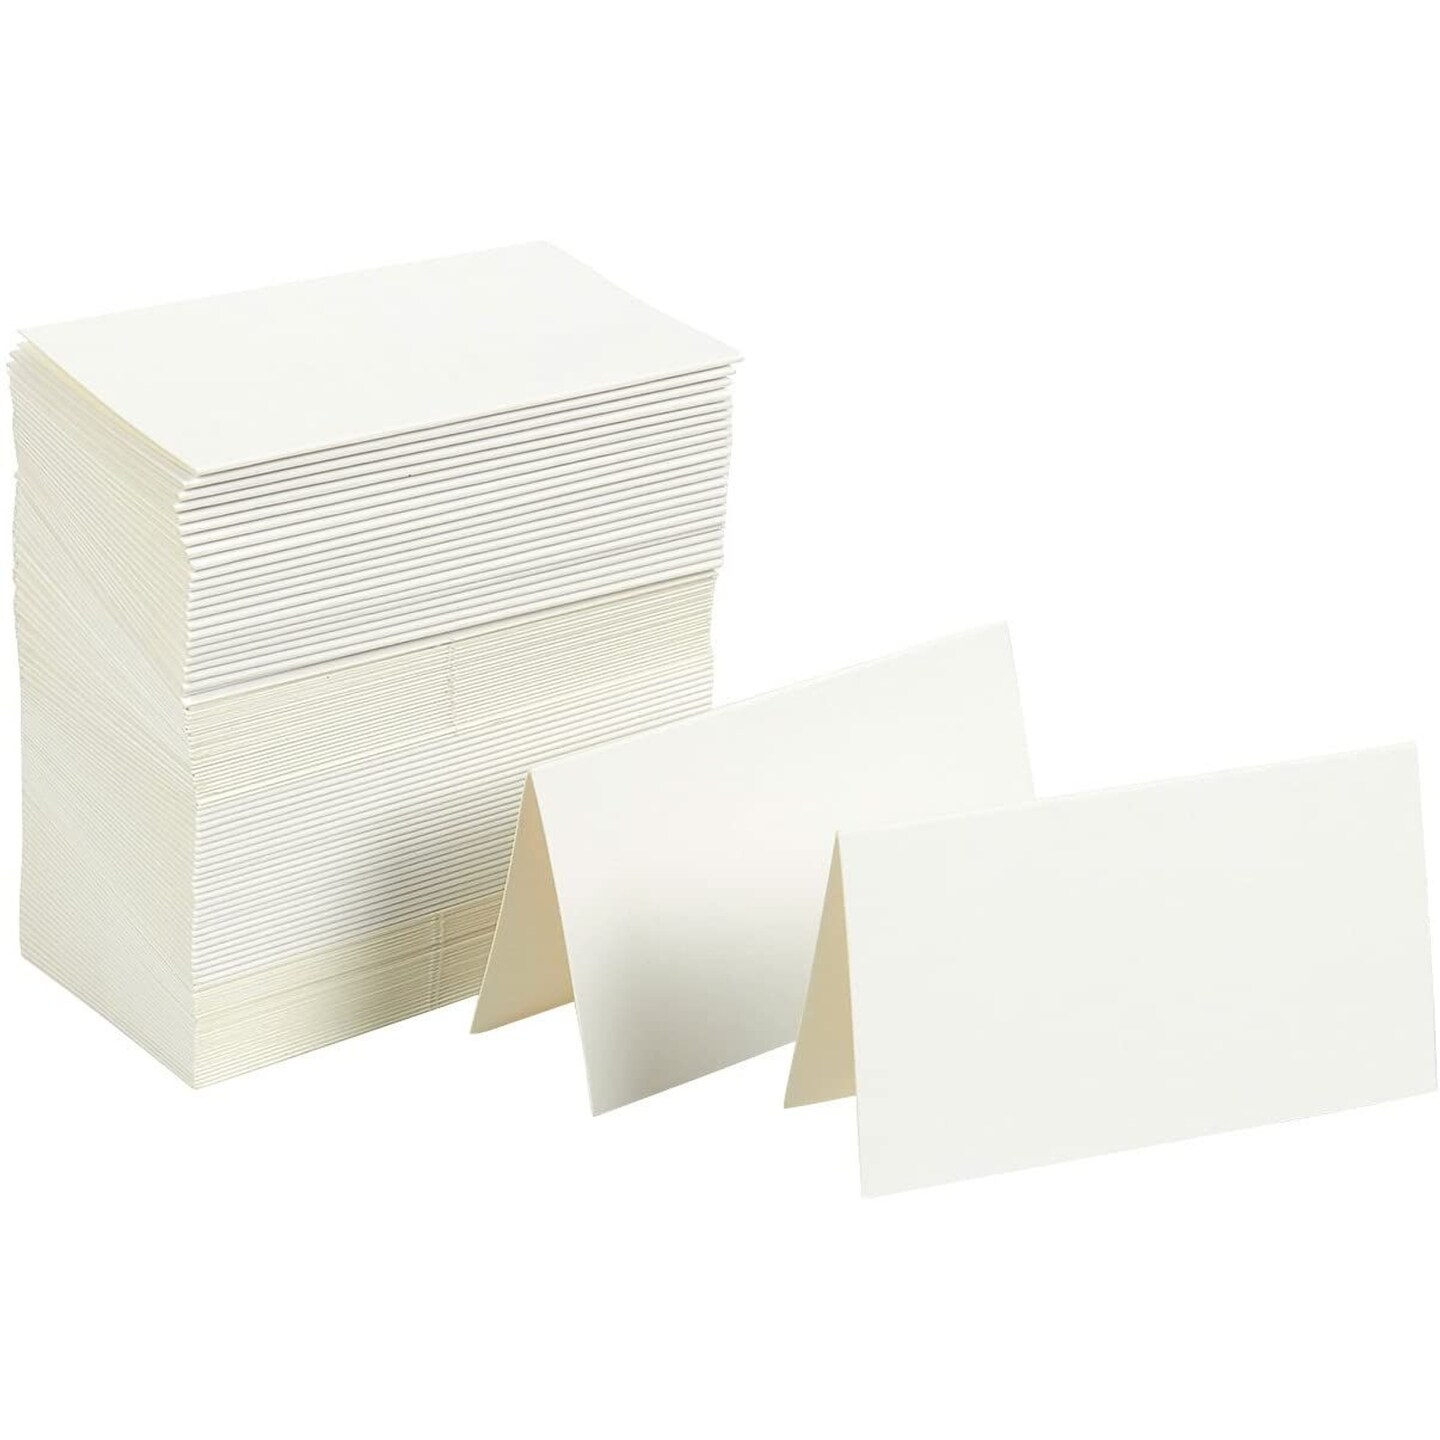 100 Pack Place Cards for Table Setting - Blank Name Cards for Wedding, Baby Showers, Banquets, Reserved Seating (3.5 x 2 In)